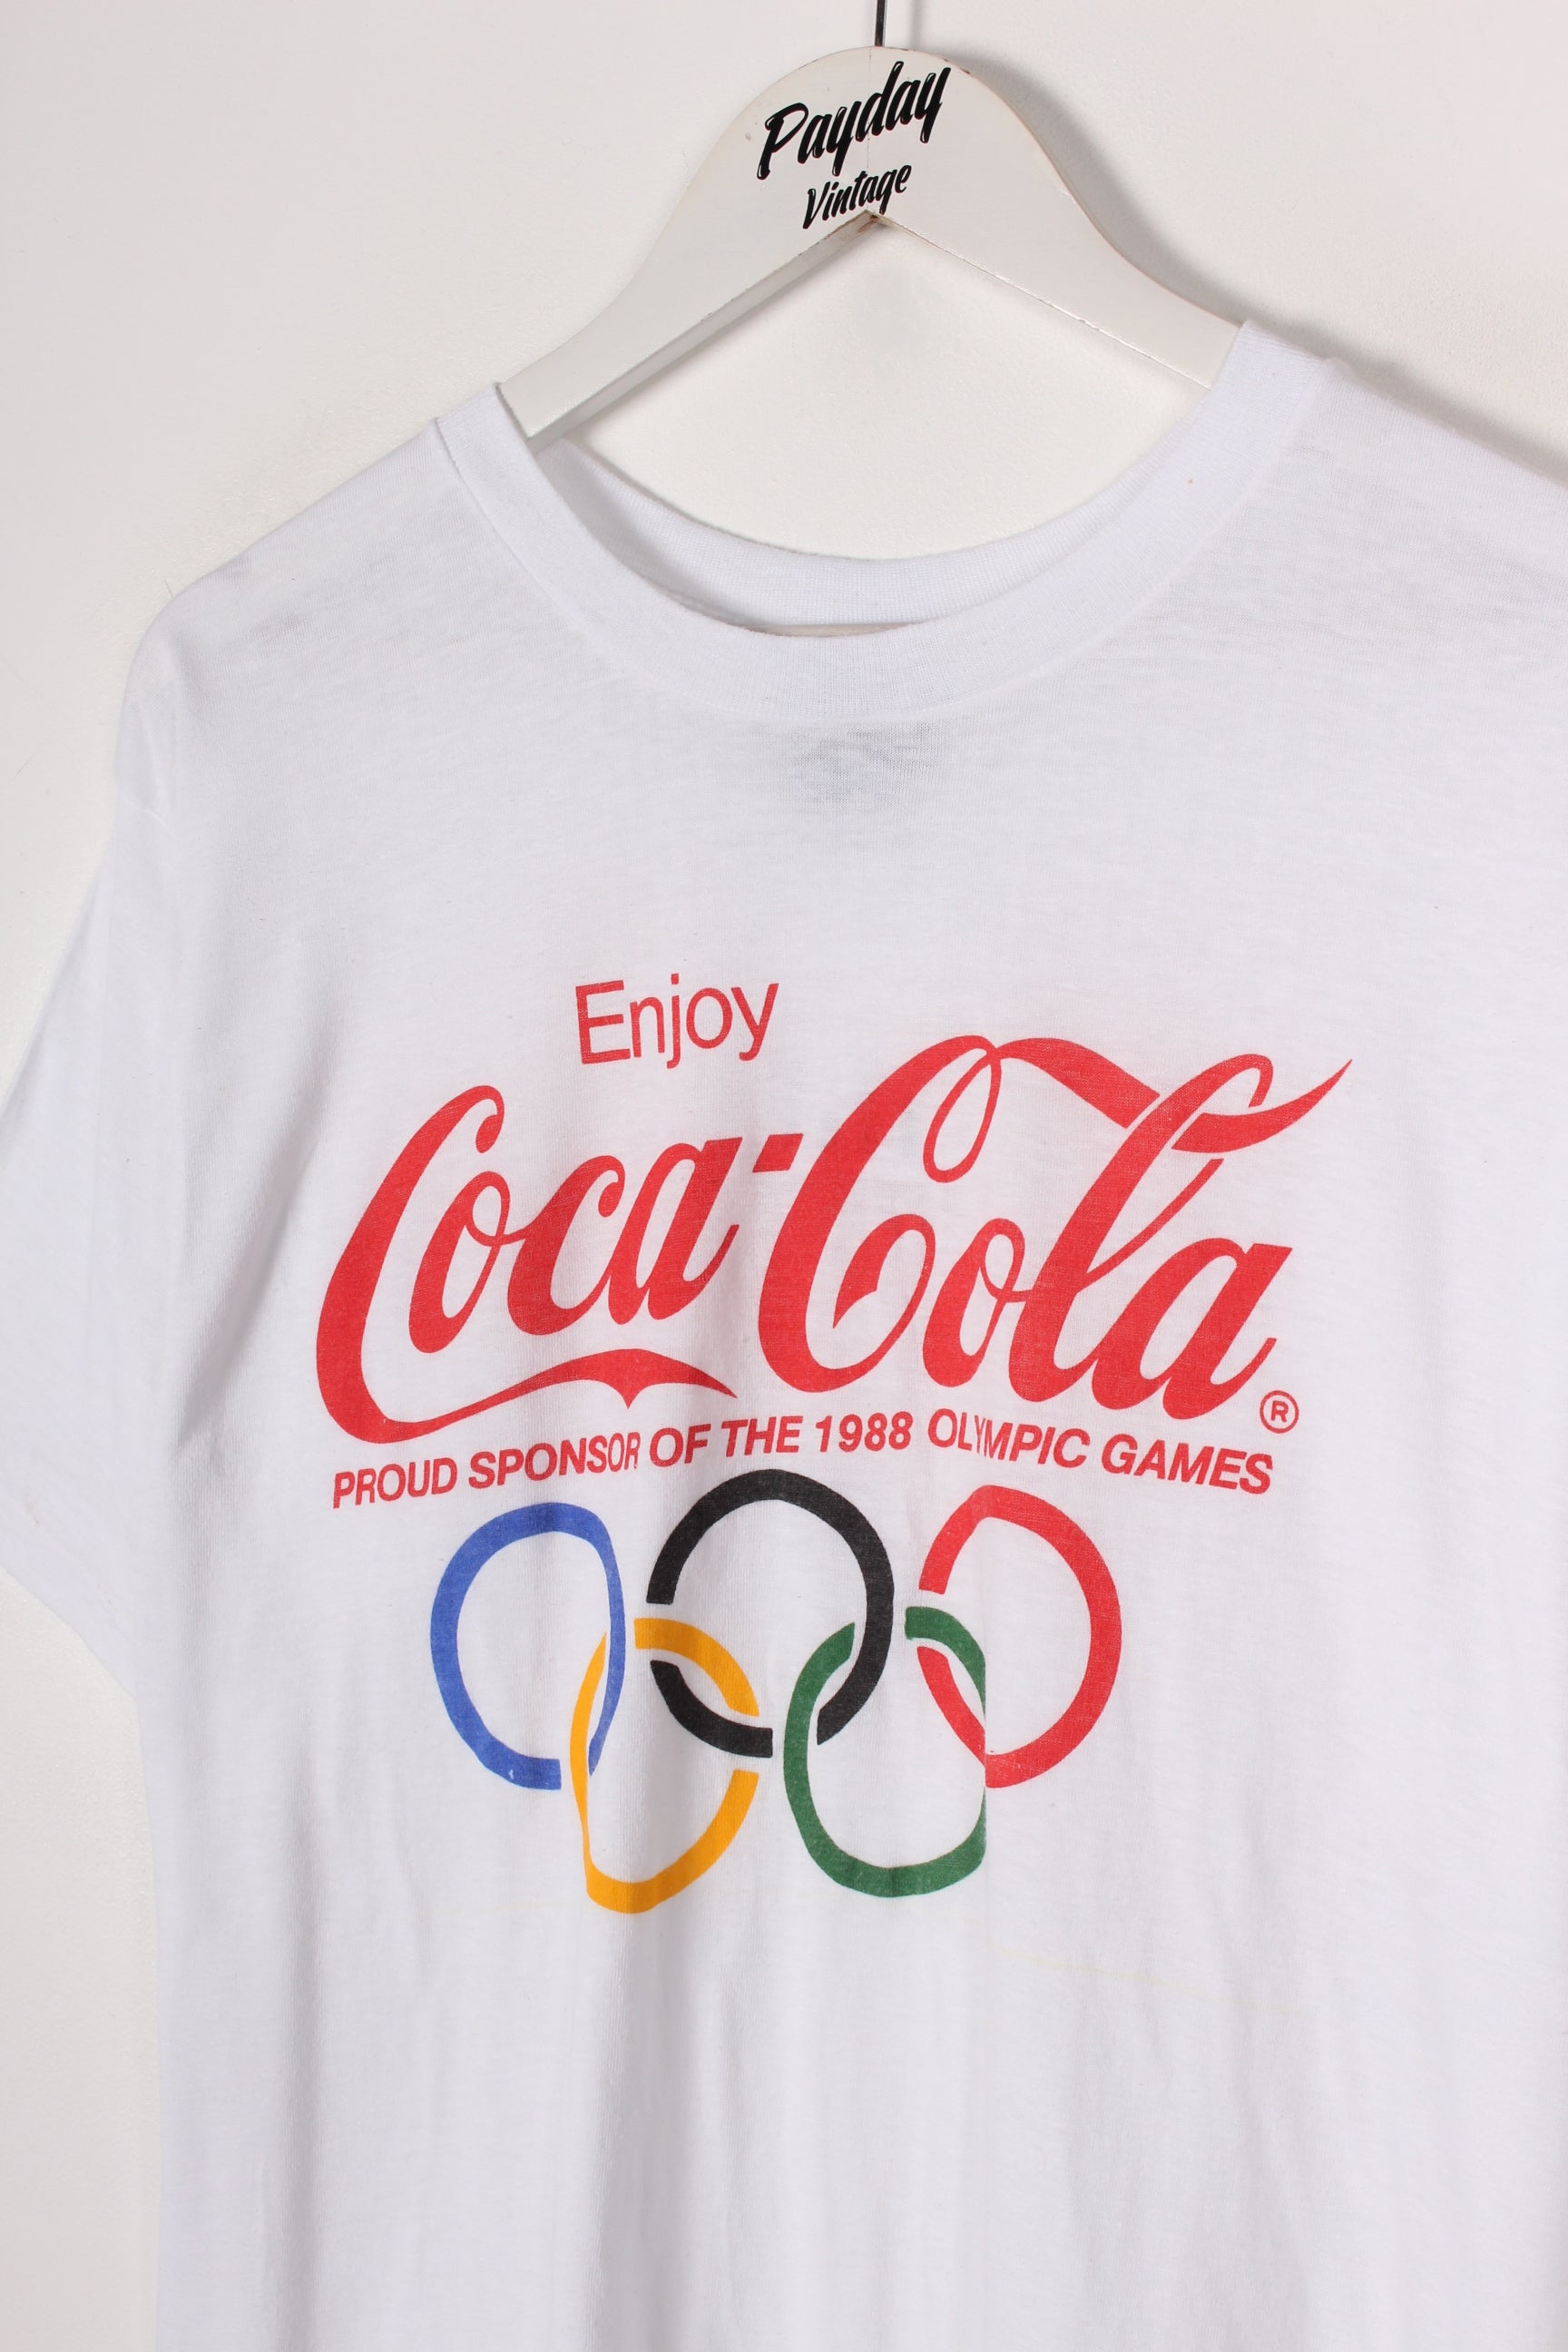 's Coca Cola T Shirt White Large – Payday Vintage